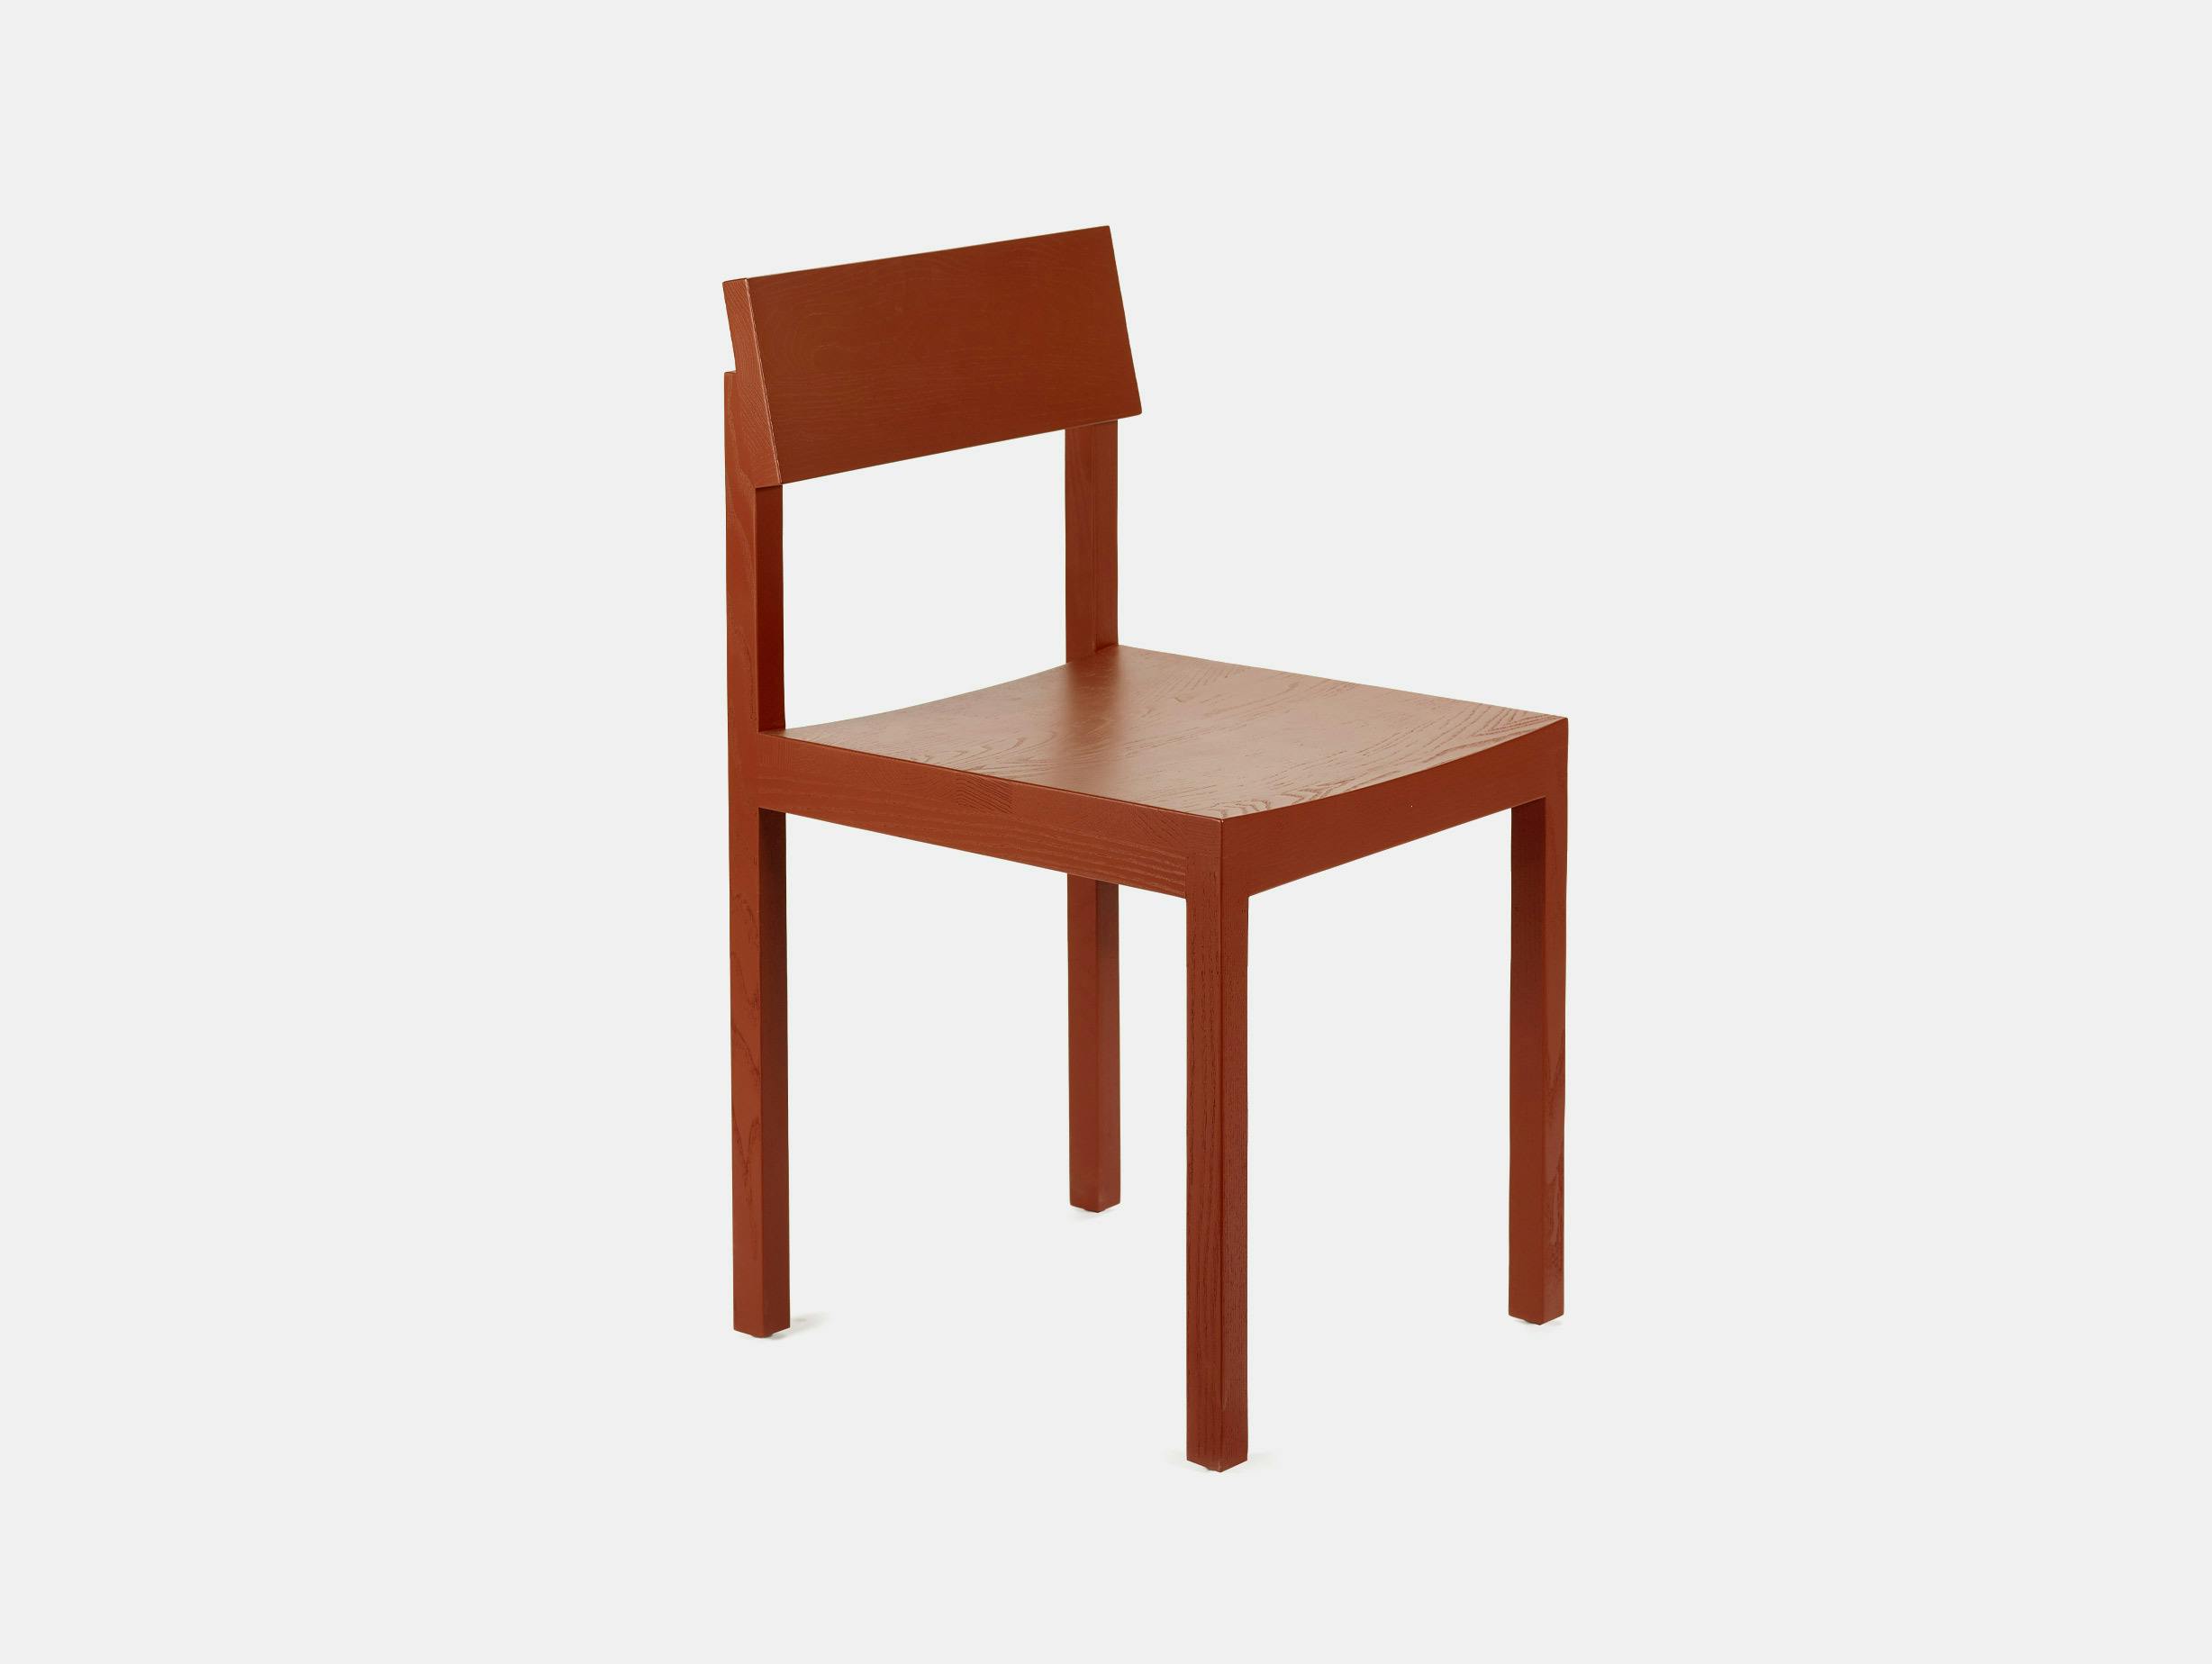 Valerie object big game silent chair clay red